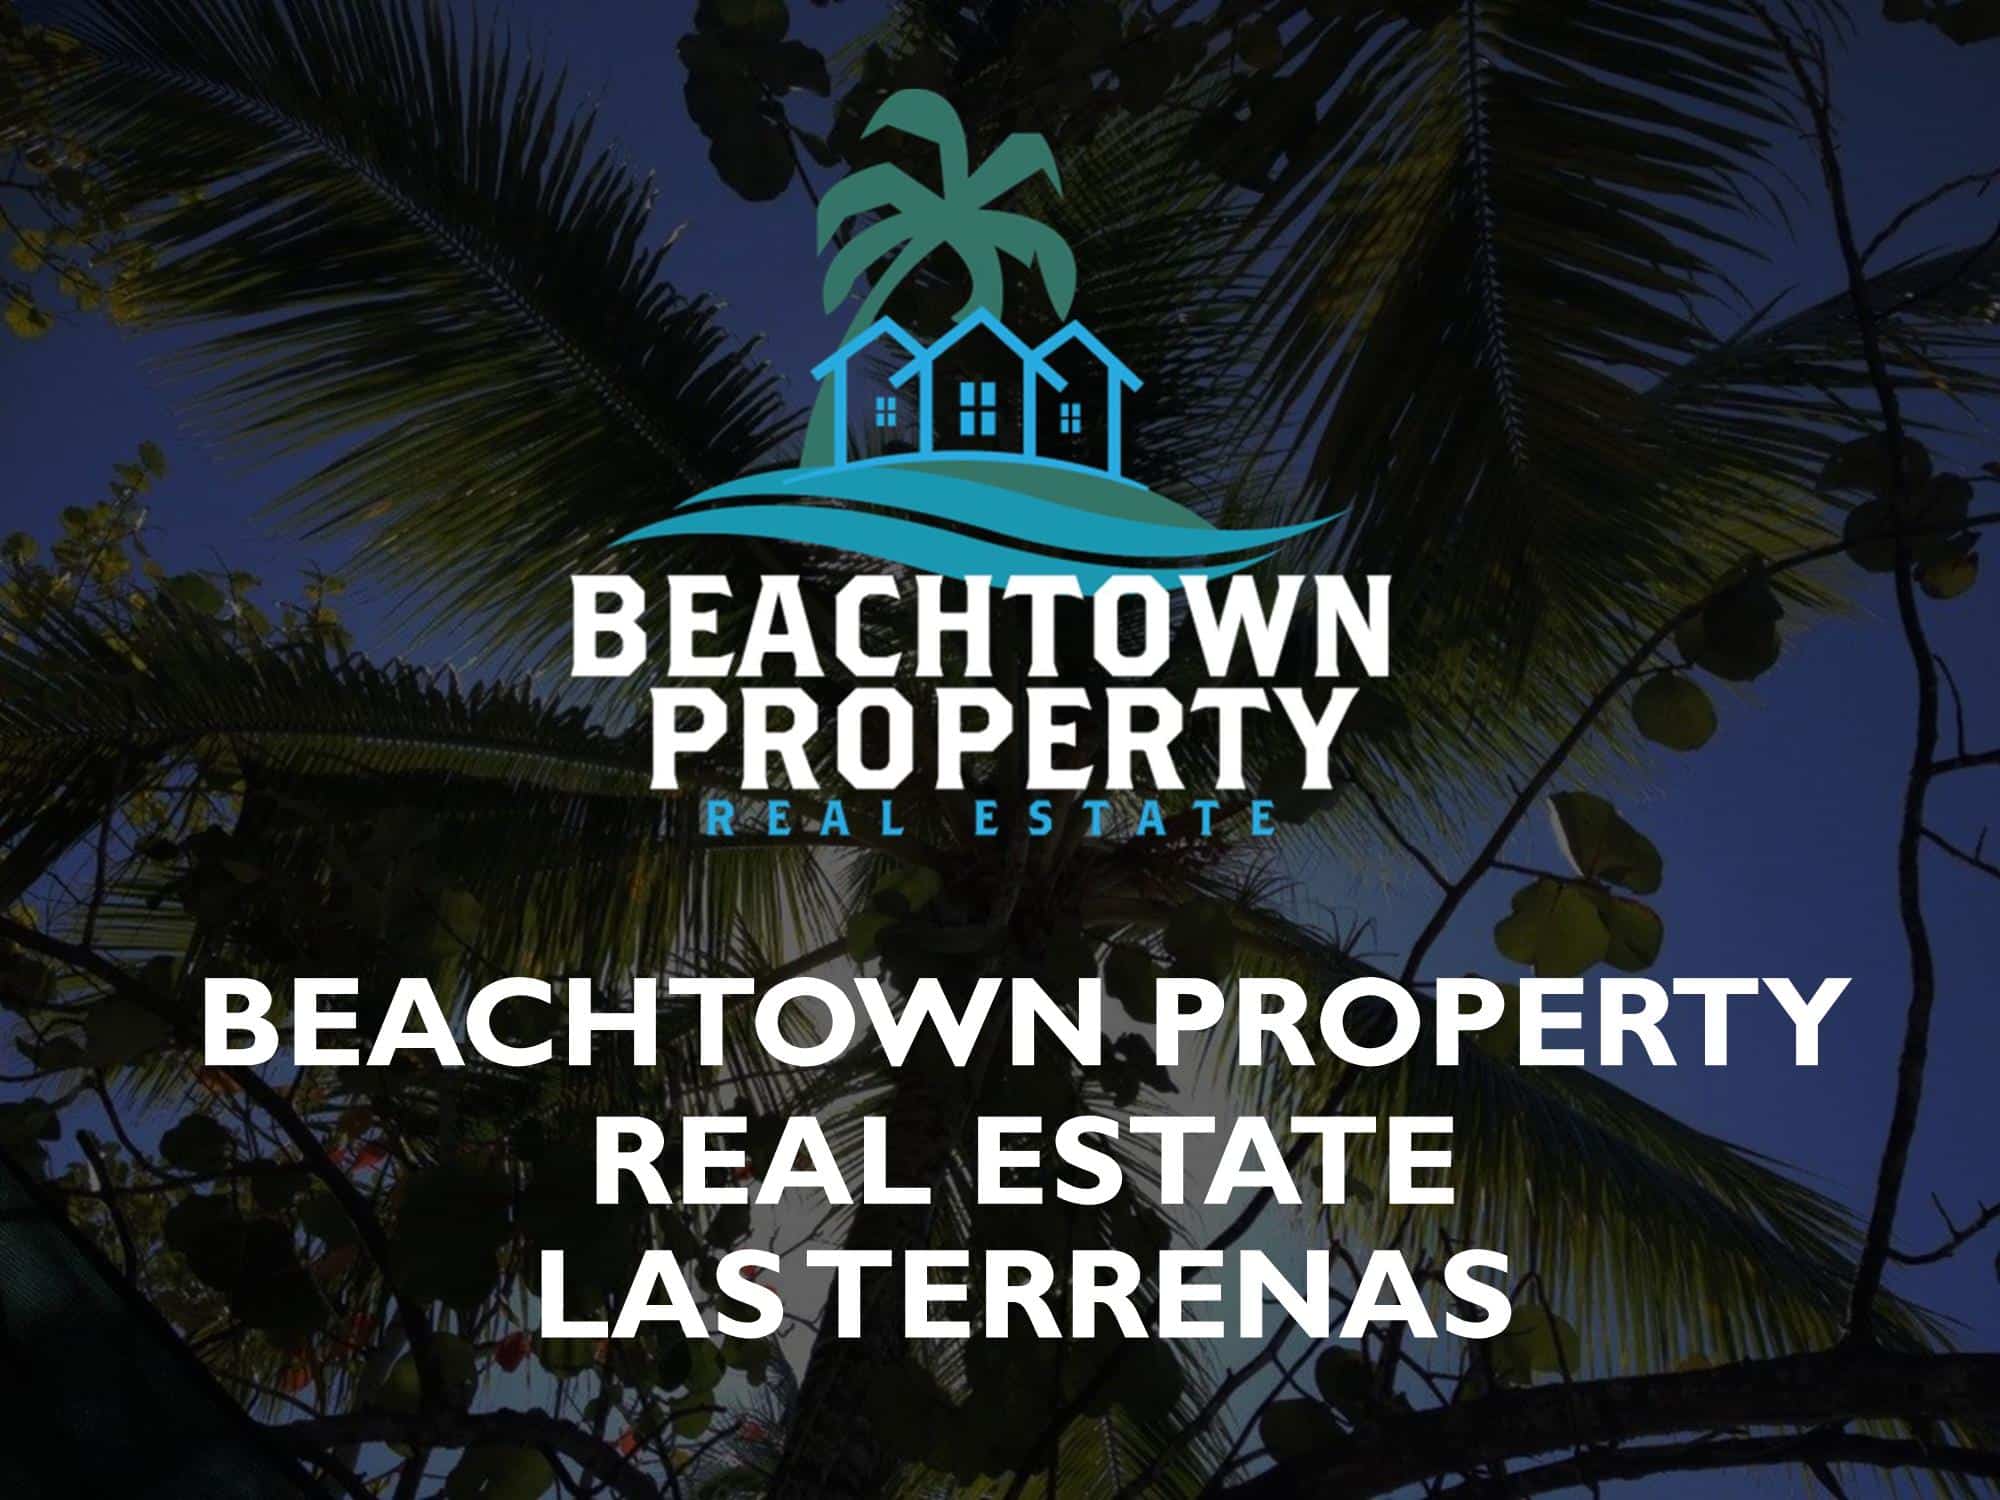 Beachtown Property Real Estate Privacy Policy